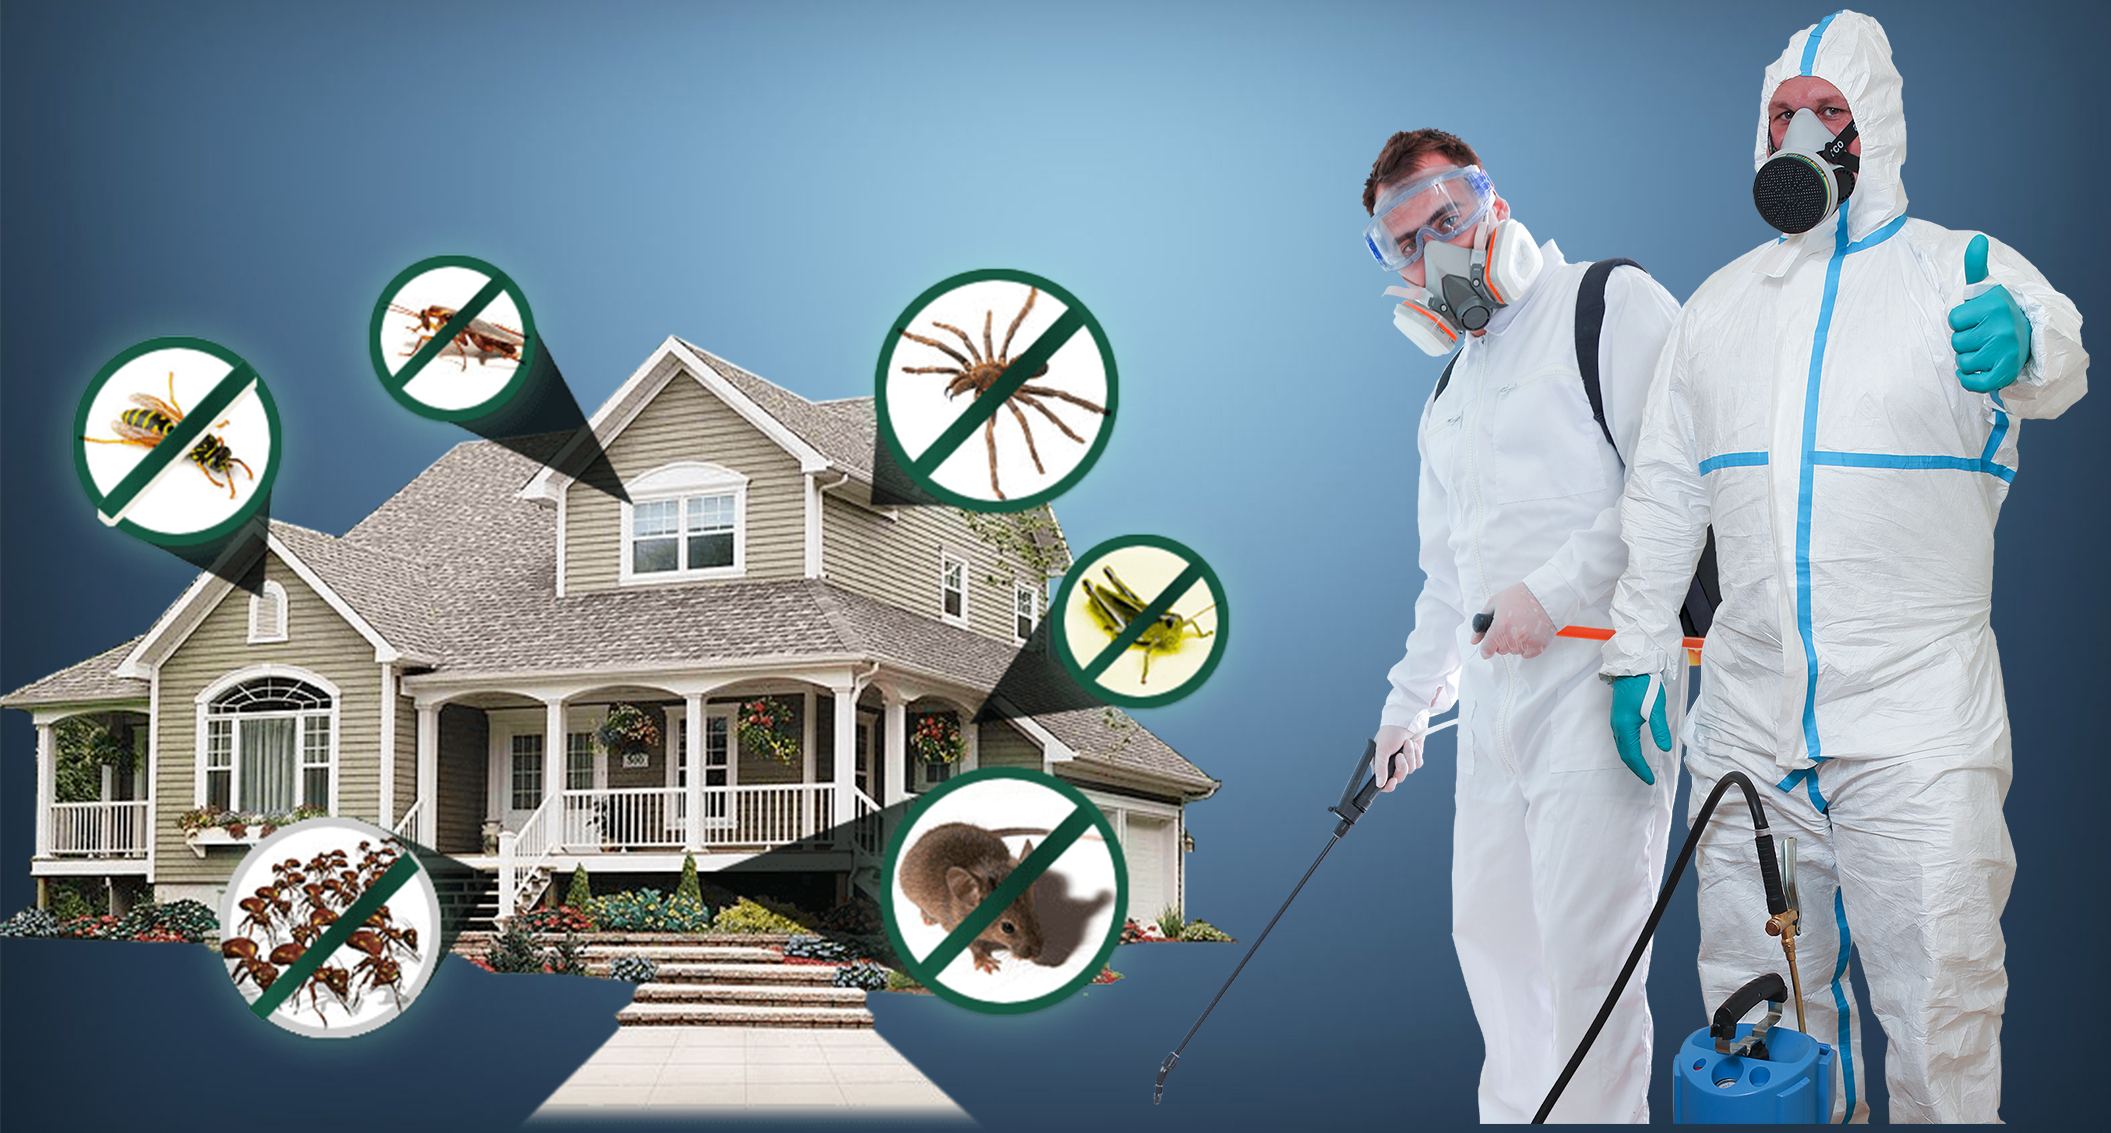 pest control services in coimbatore